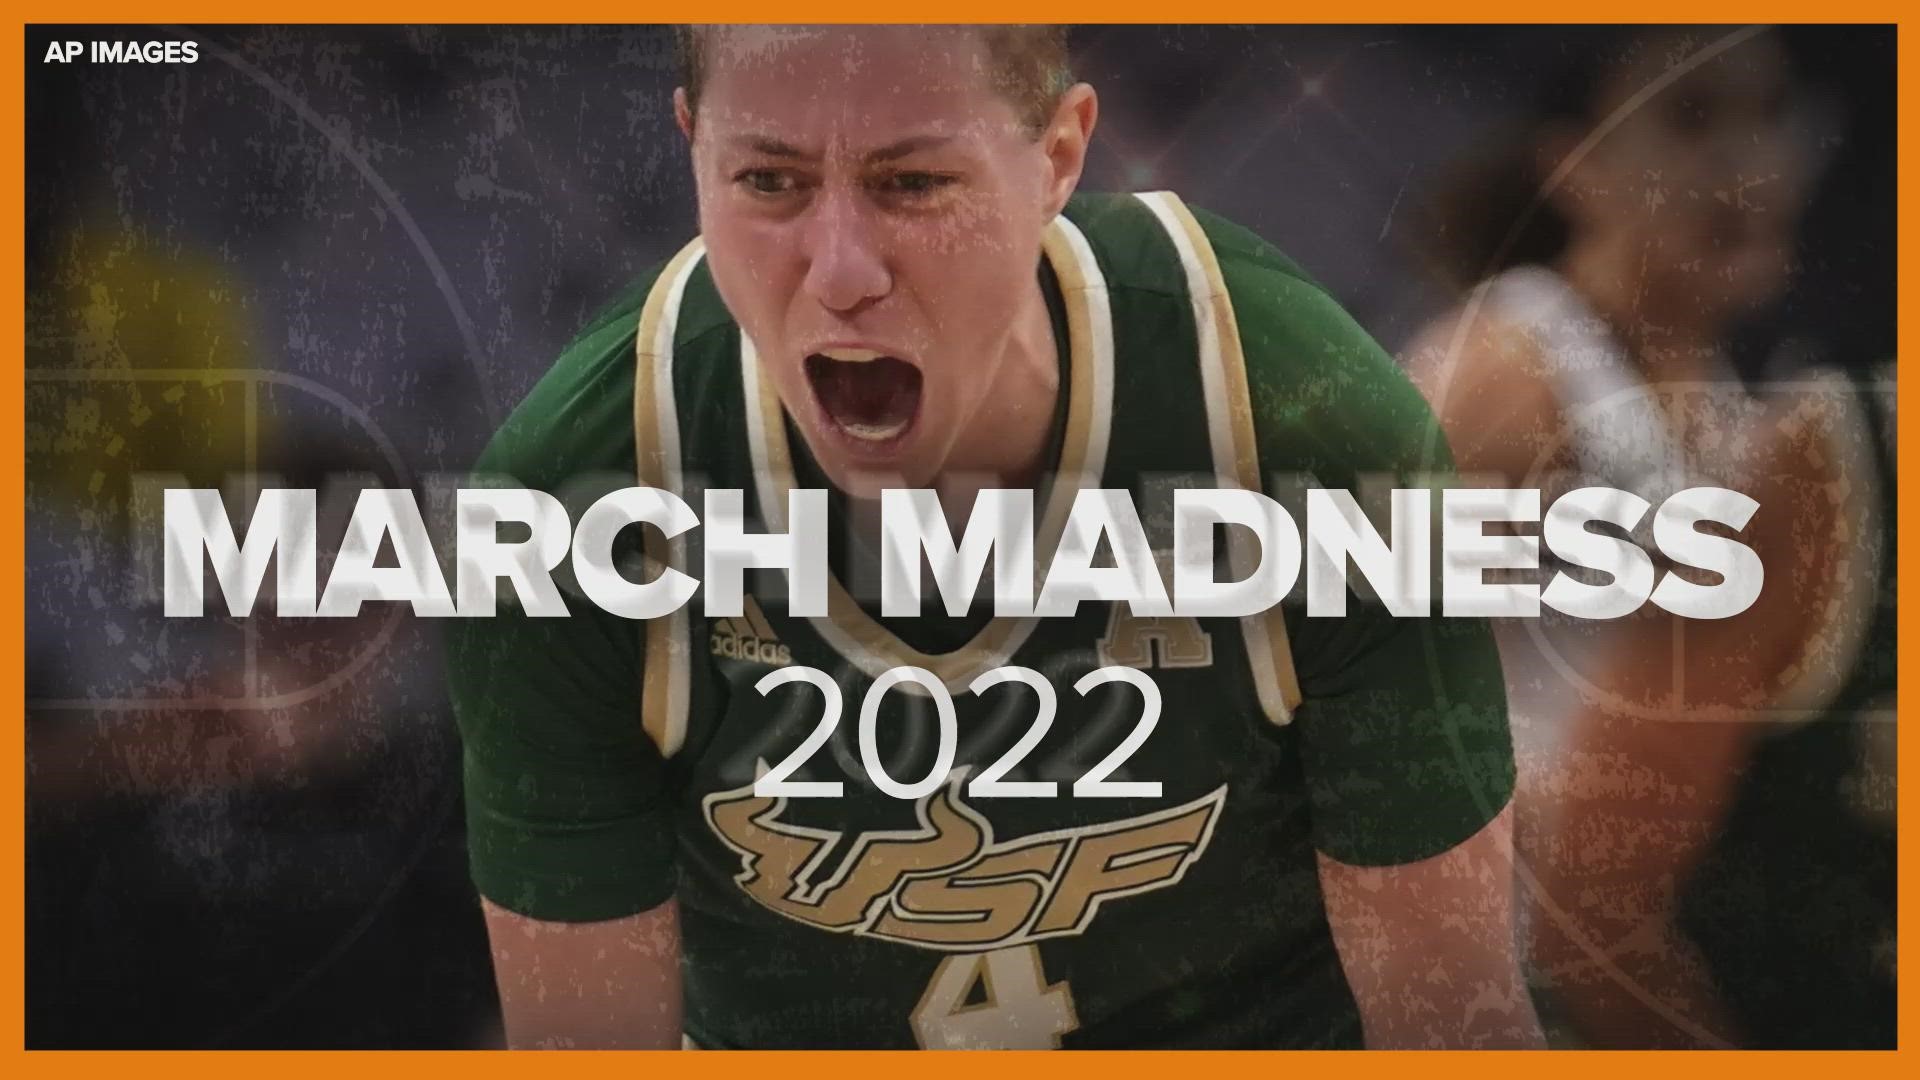 Who Won March Madness Last Year